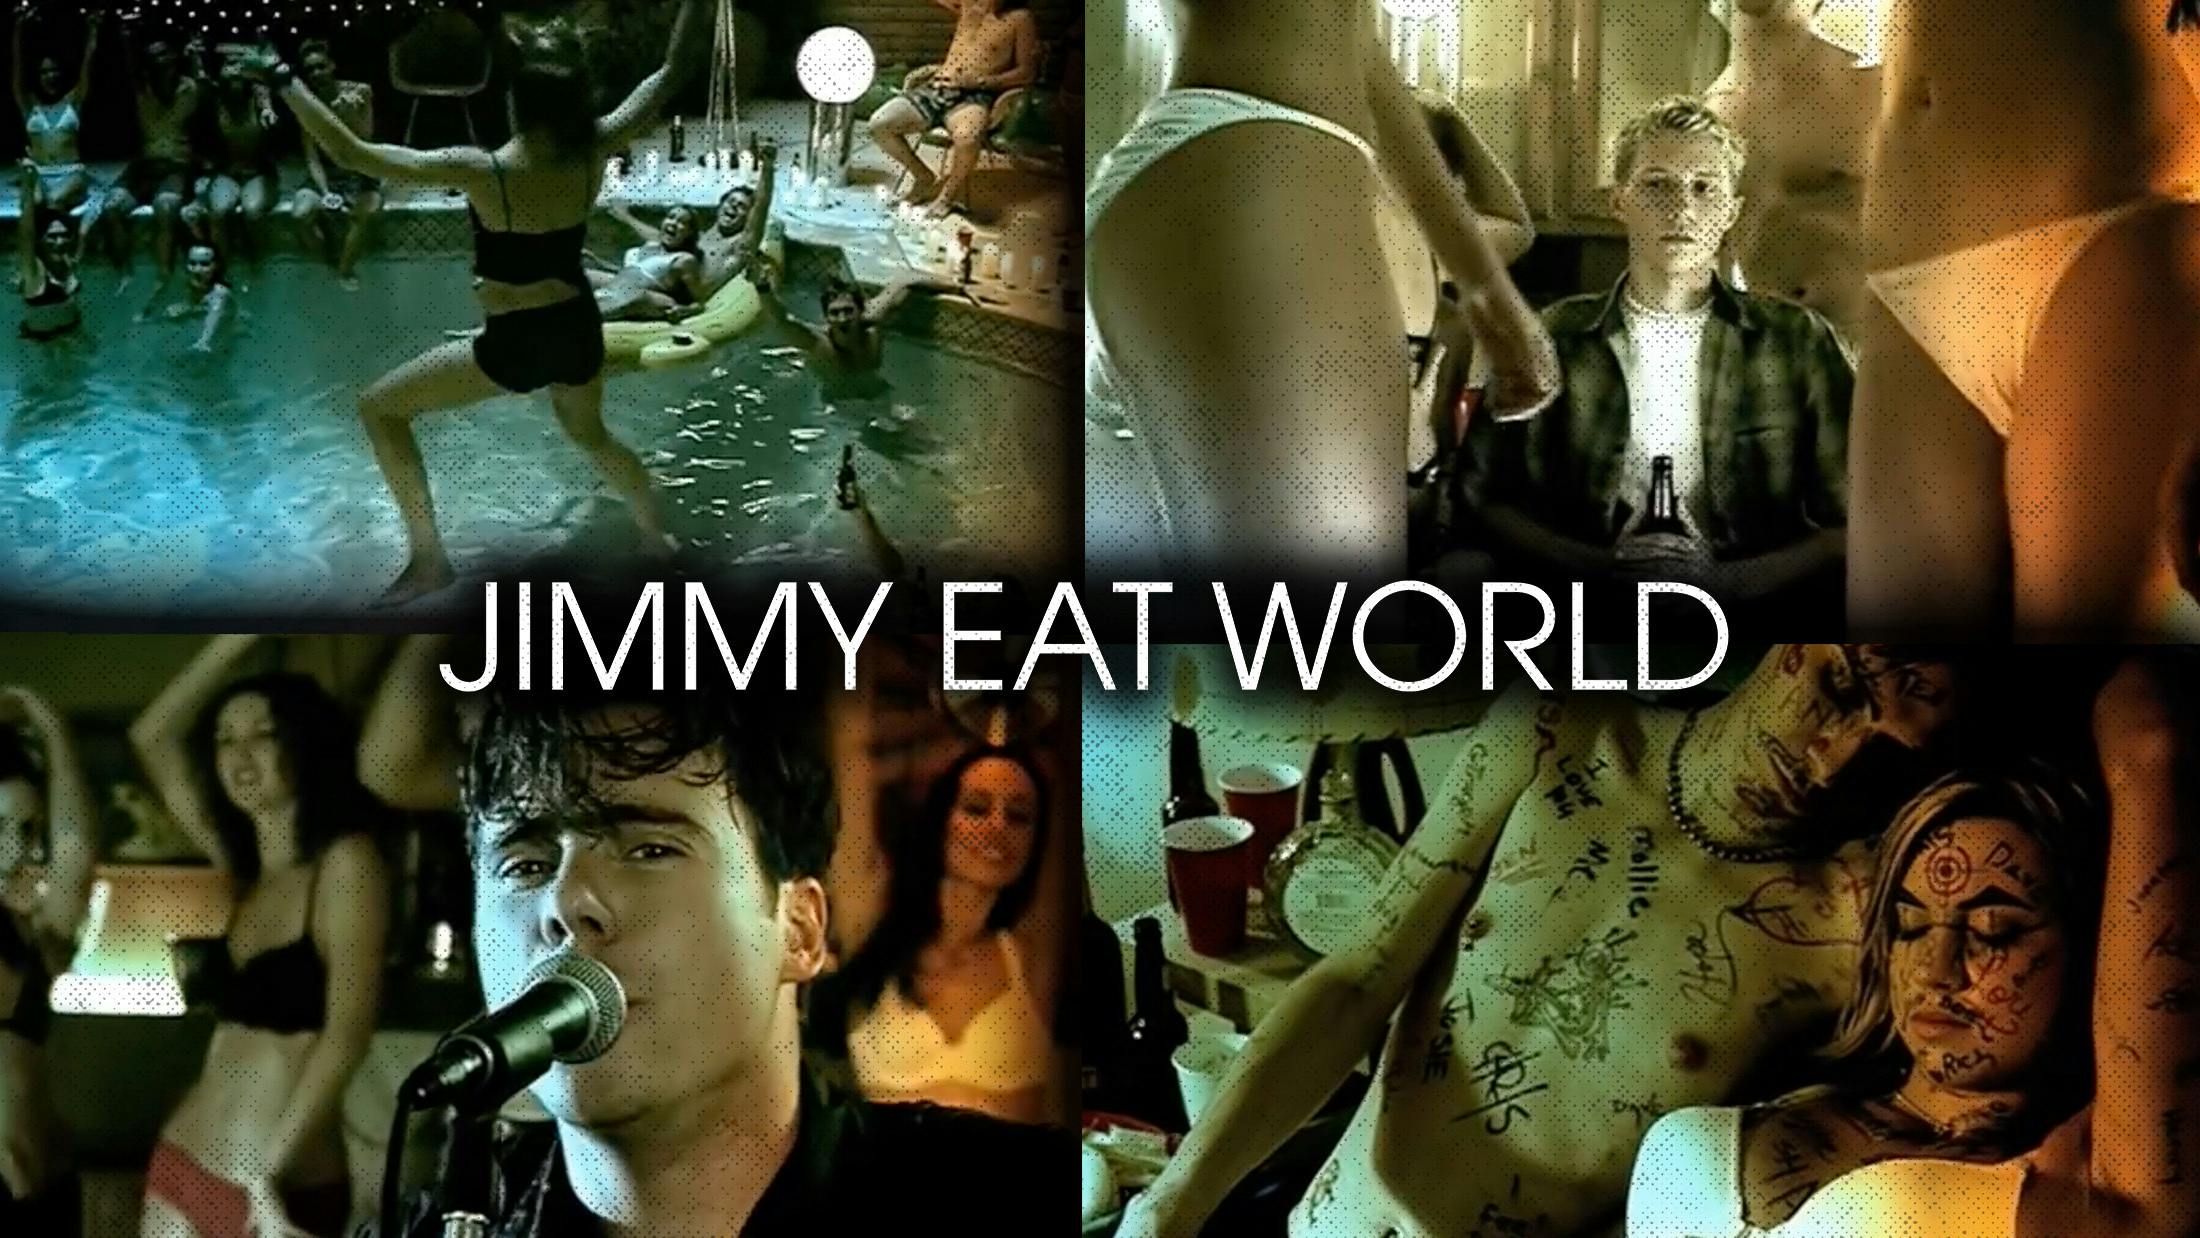 A deep dive into Jimmy Eat World’s video for The Middle